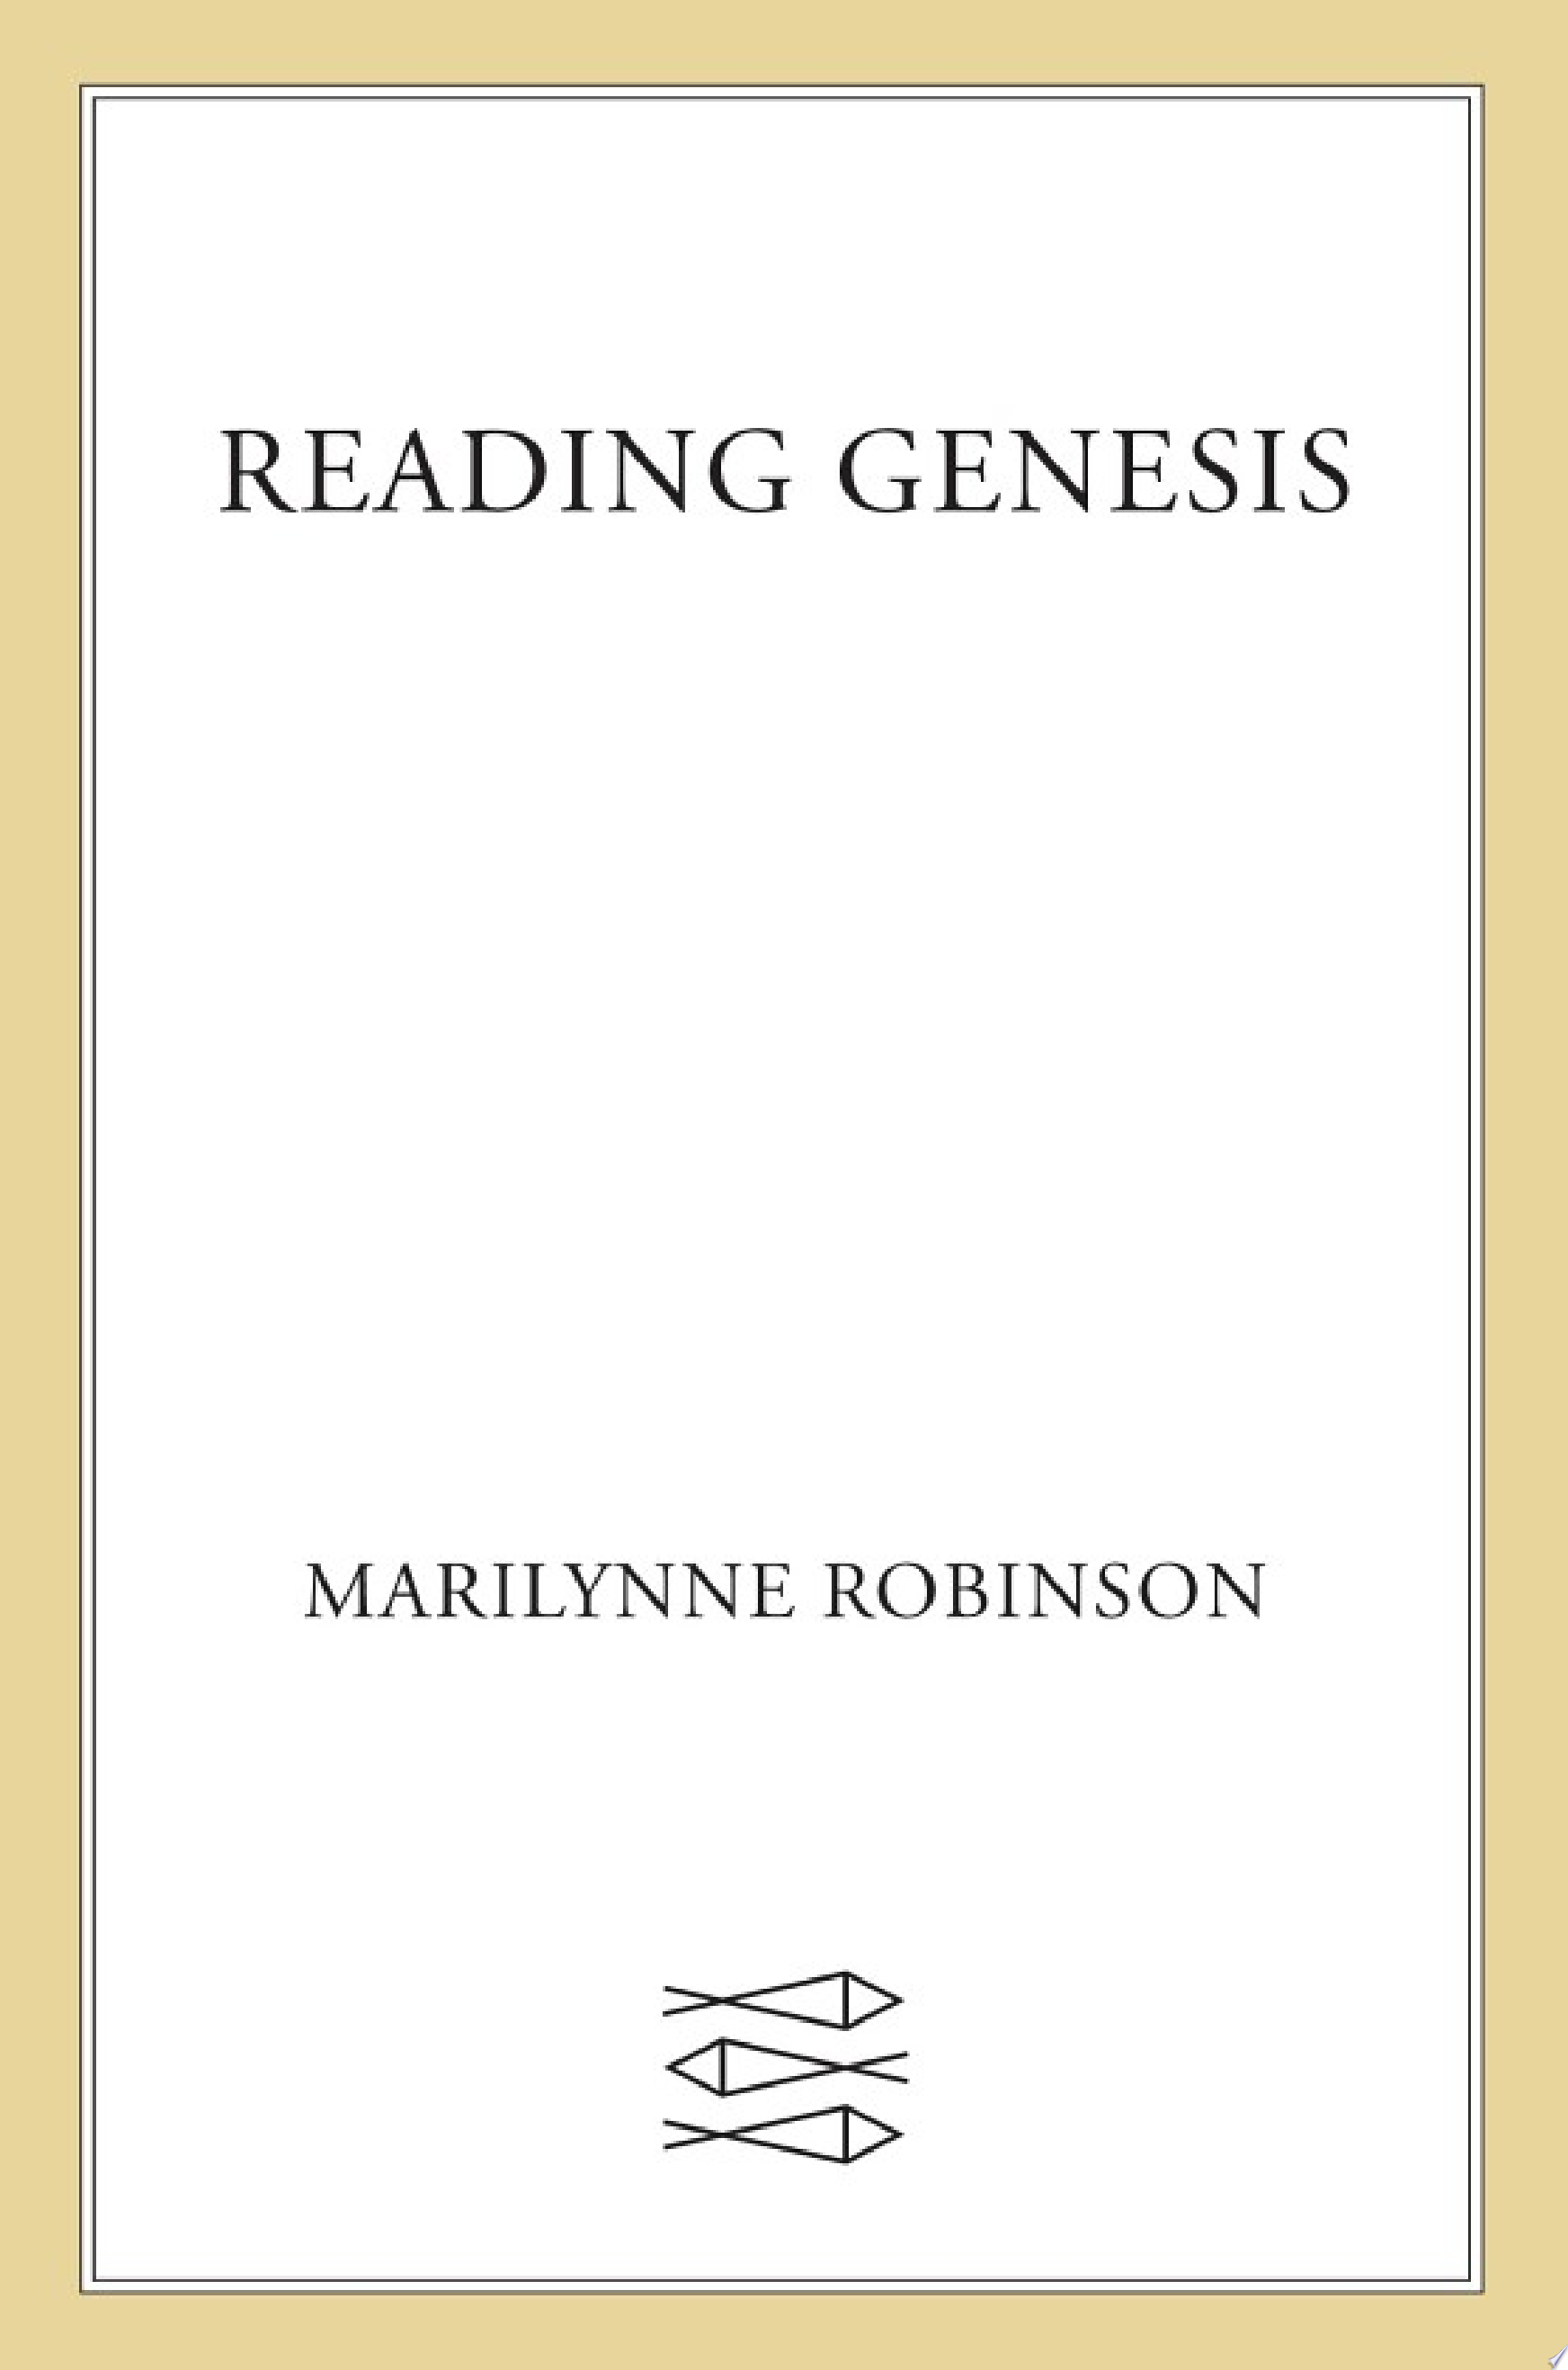 Image for "Reading Genesis"